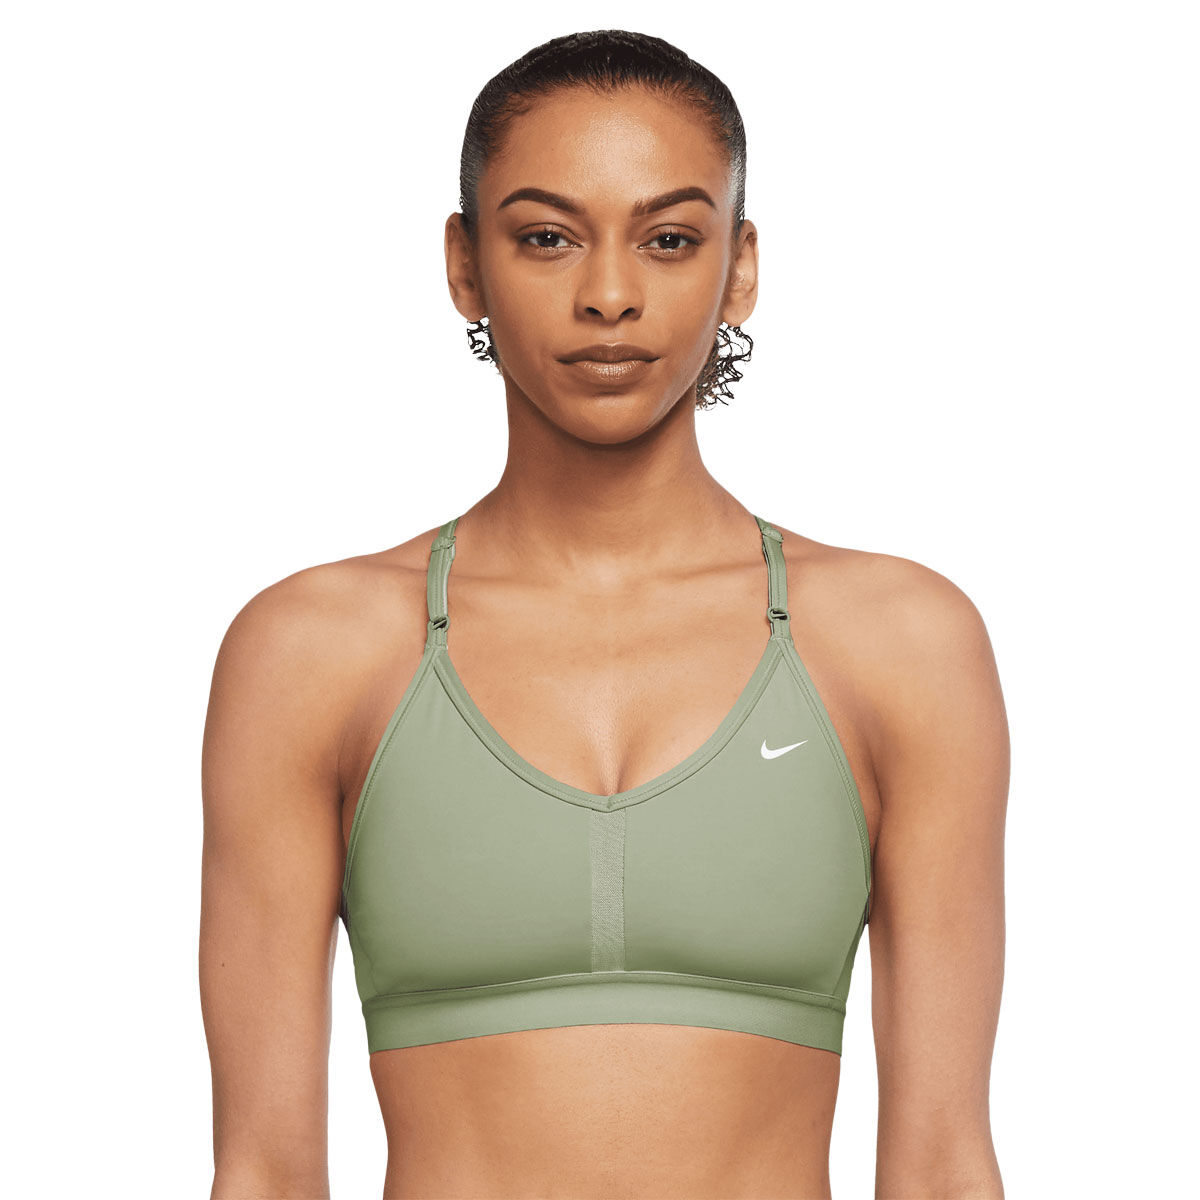 Nike, Intimates & Sleepwear, Nike Dri Fit Strappy Cut Out Sports Bra  Large Athletic Sporty Summer Workout